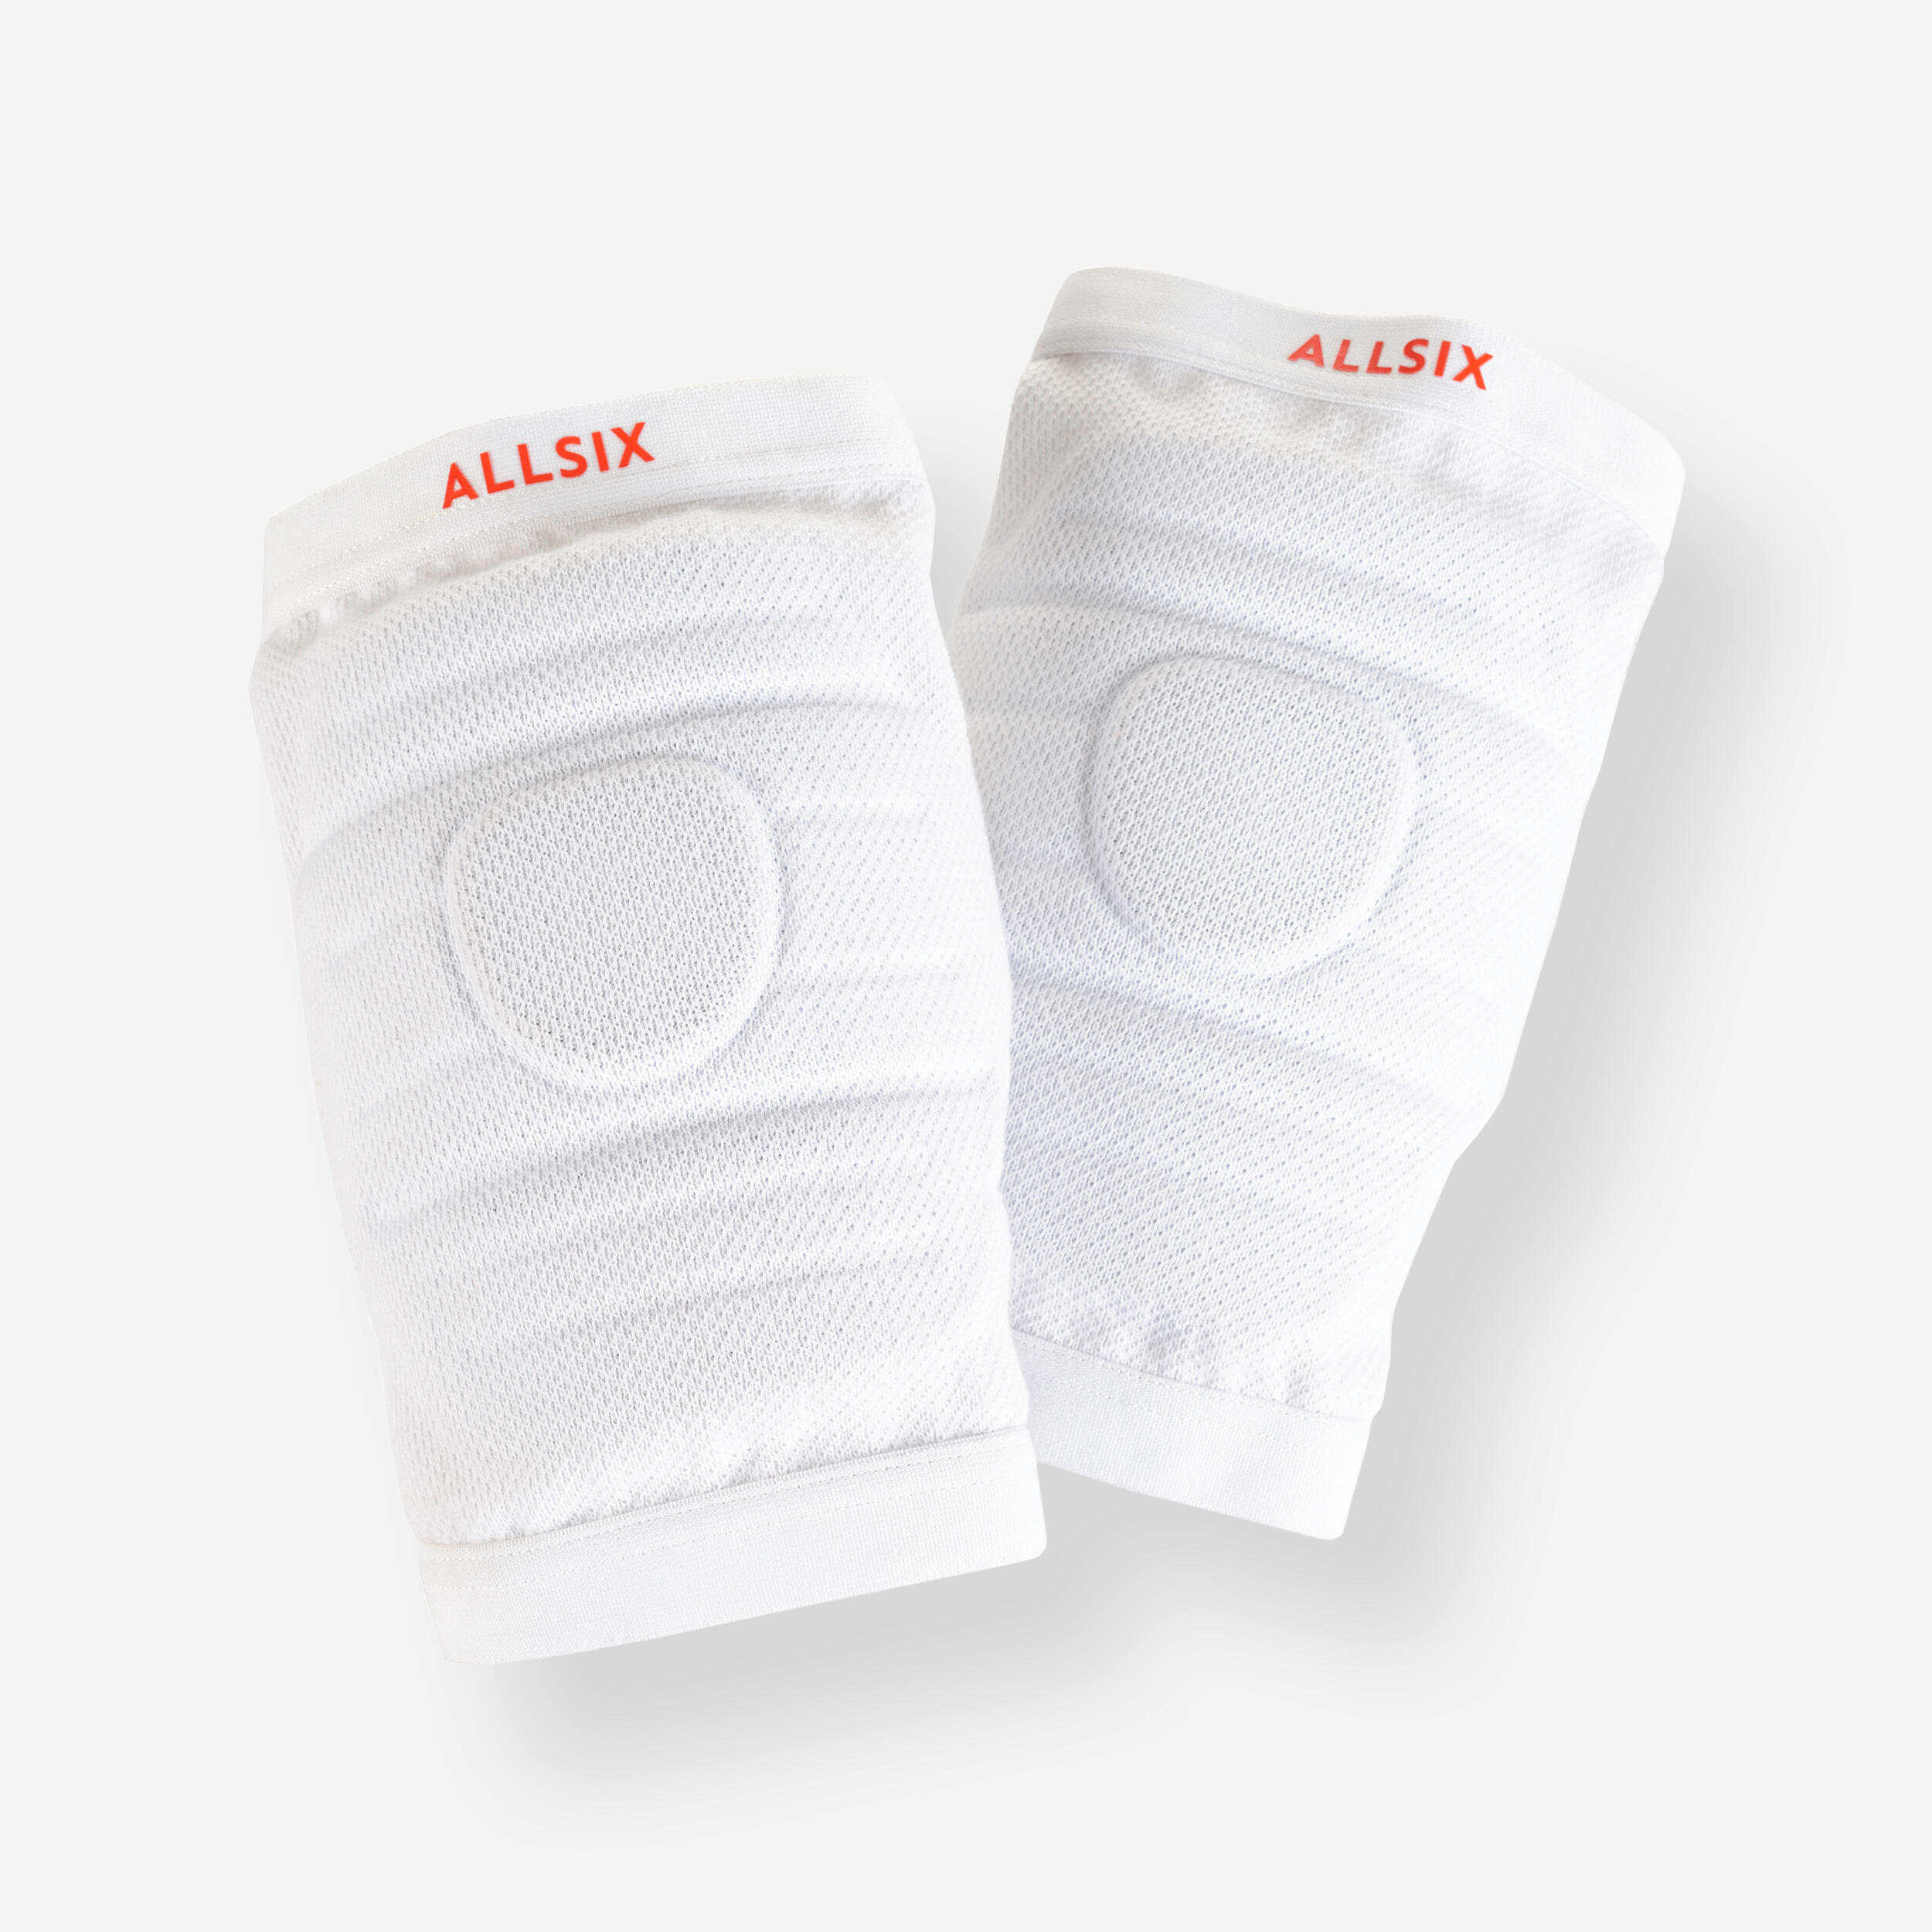 ALLSIX Volleyball Knee Pads VKP900 - White